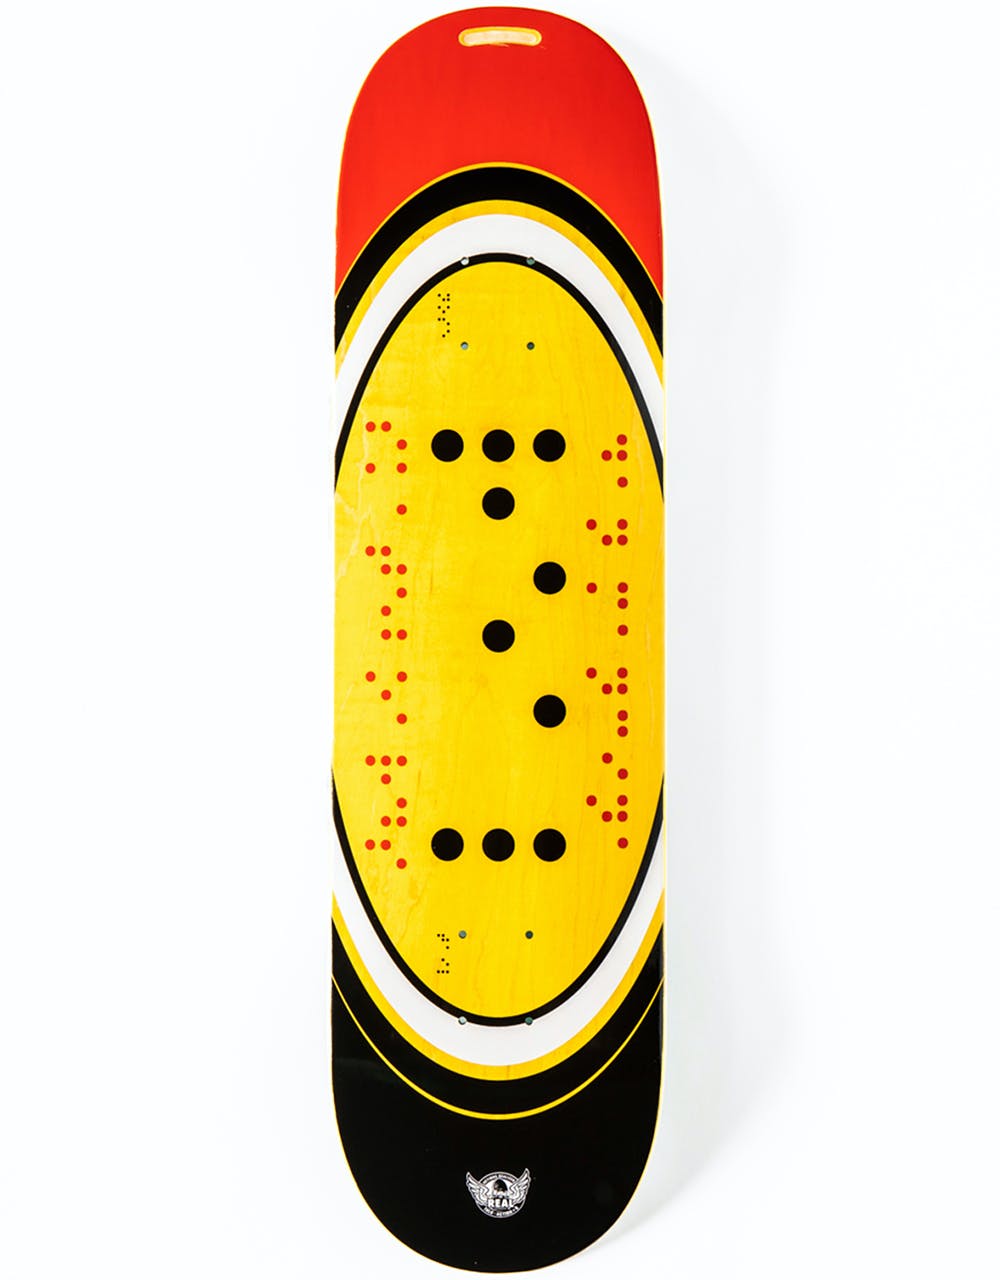 Real Mancina x Actions REALized Braile Skateboard Deck - 8.25"